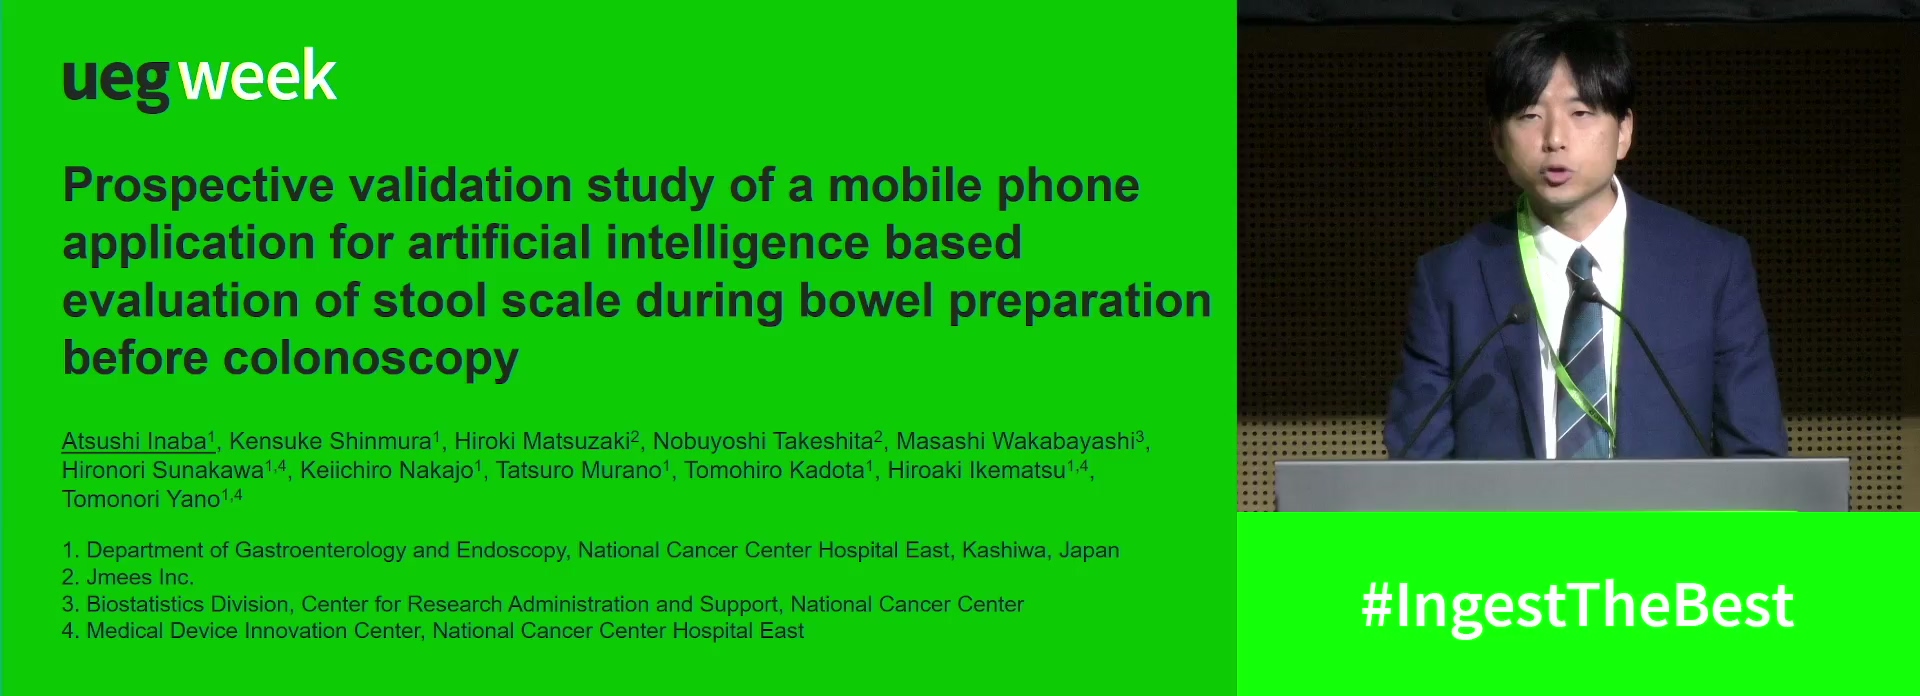 PROSPECTIVE VALIDATION STUDY OF A MOBILE PHONE APPLICATION FOR ARTIFICIAL INTELLIGENCE-BASED EVALUATION OF STOOL SCALE DURING BOWEL PREPARATION BEFORE COLONOSCOPY